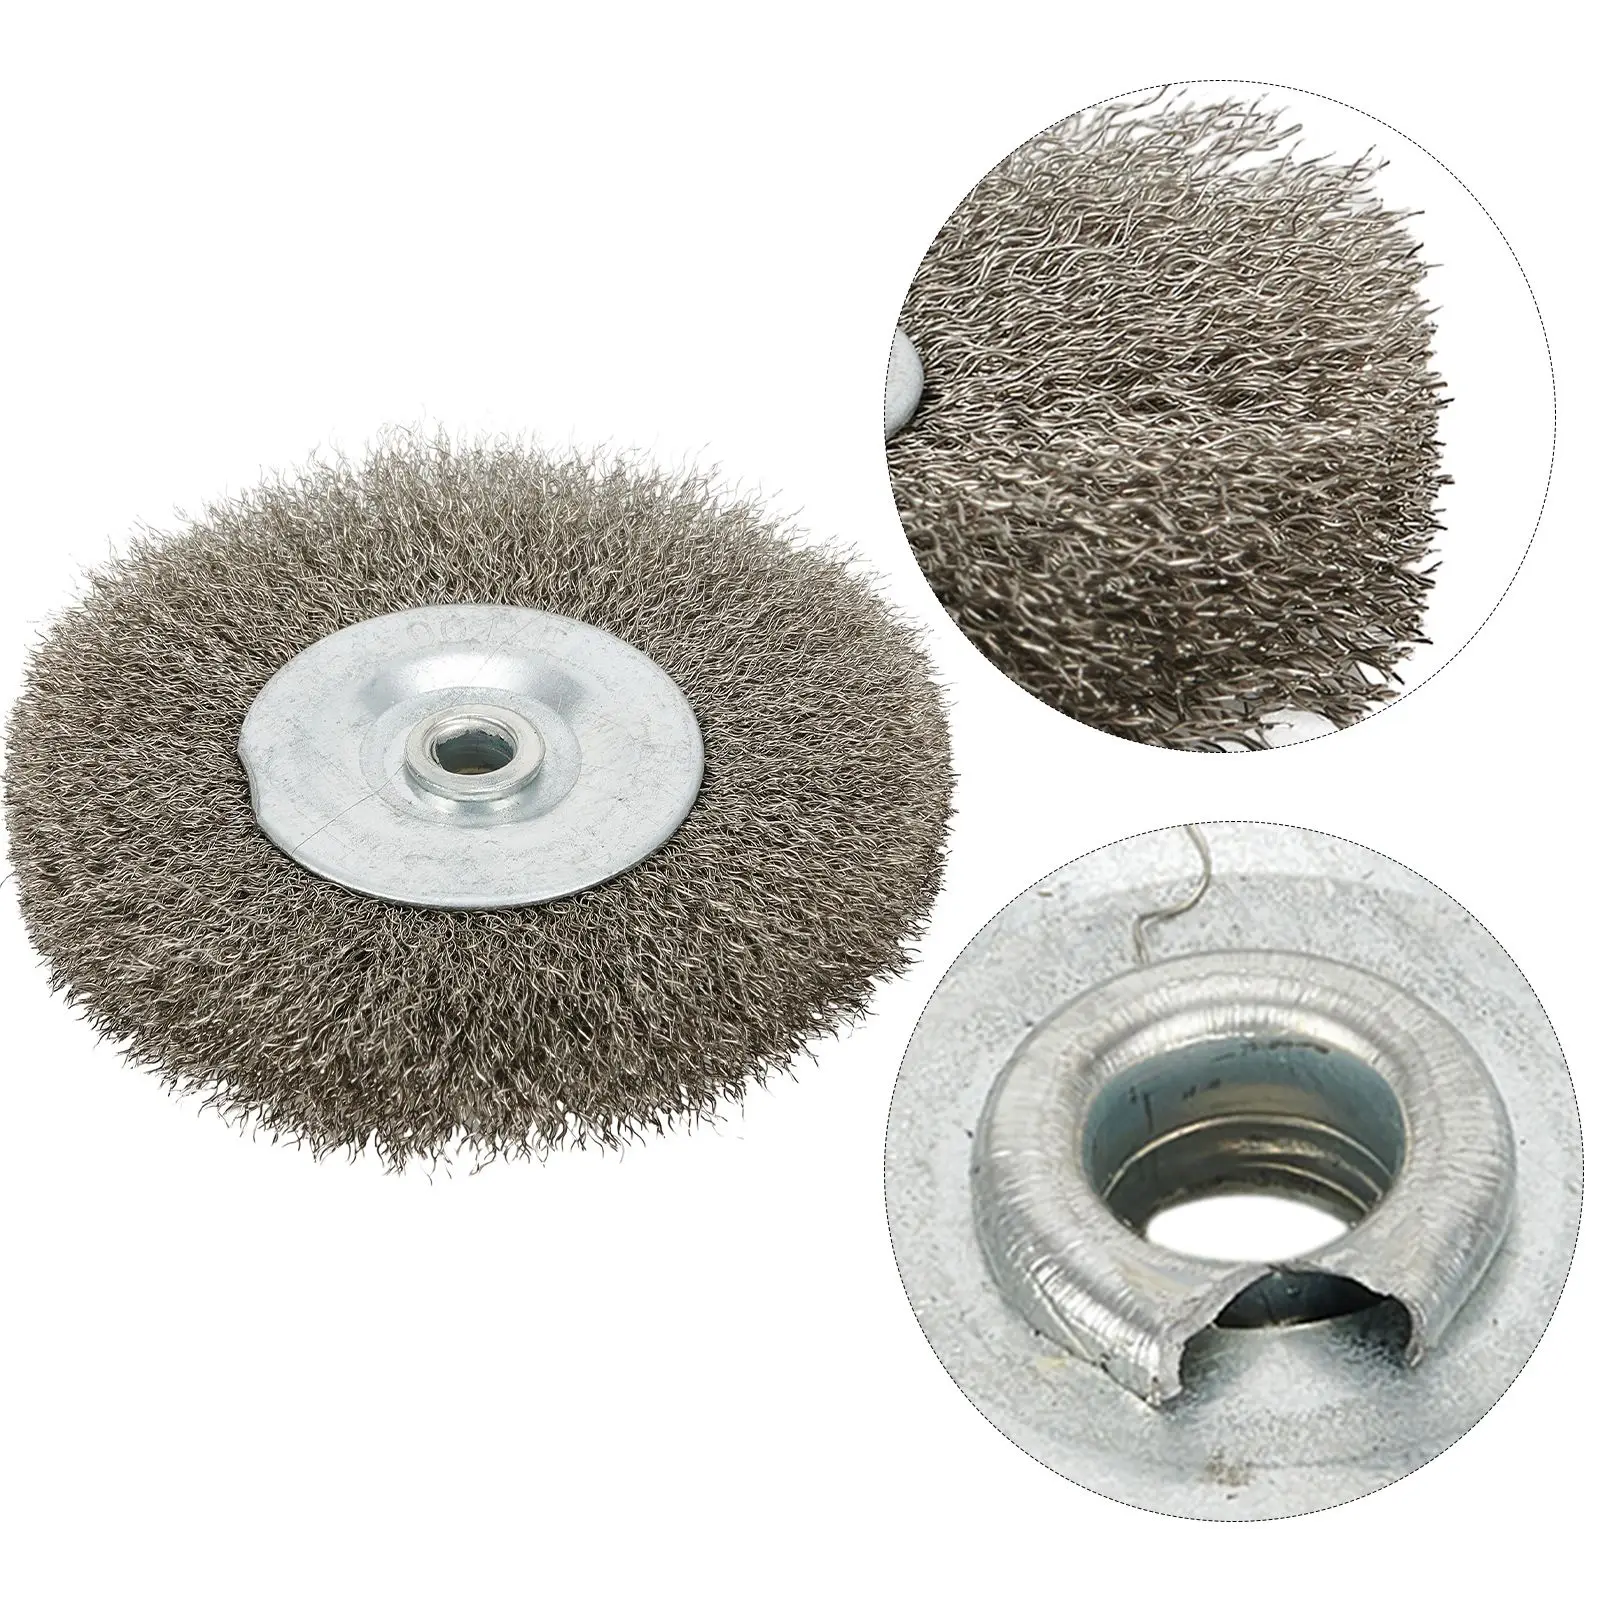 Flat Crimped Wire Wheel Brush For Angle Grinder 0.52in Bore Stainless Steel 3inch Outer Diamter 13mm Internal Diamter Power Tool bore 10 15 20 30 40mm stroke 90s 180s 270s cdrb2bw series rotation angle built in magnet single vane single flat air cylinder